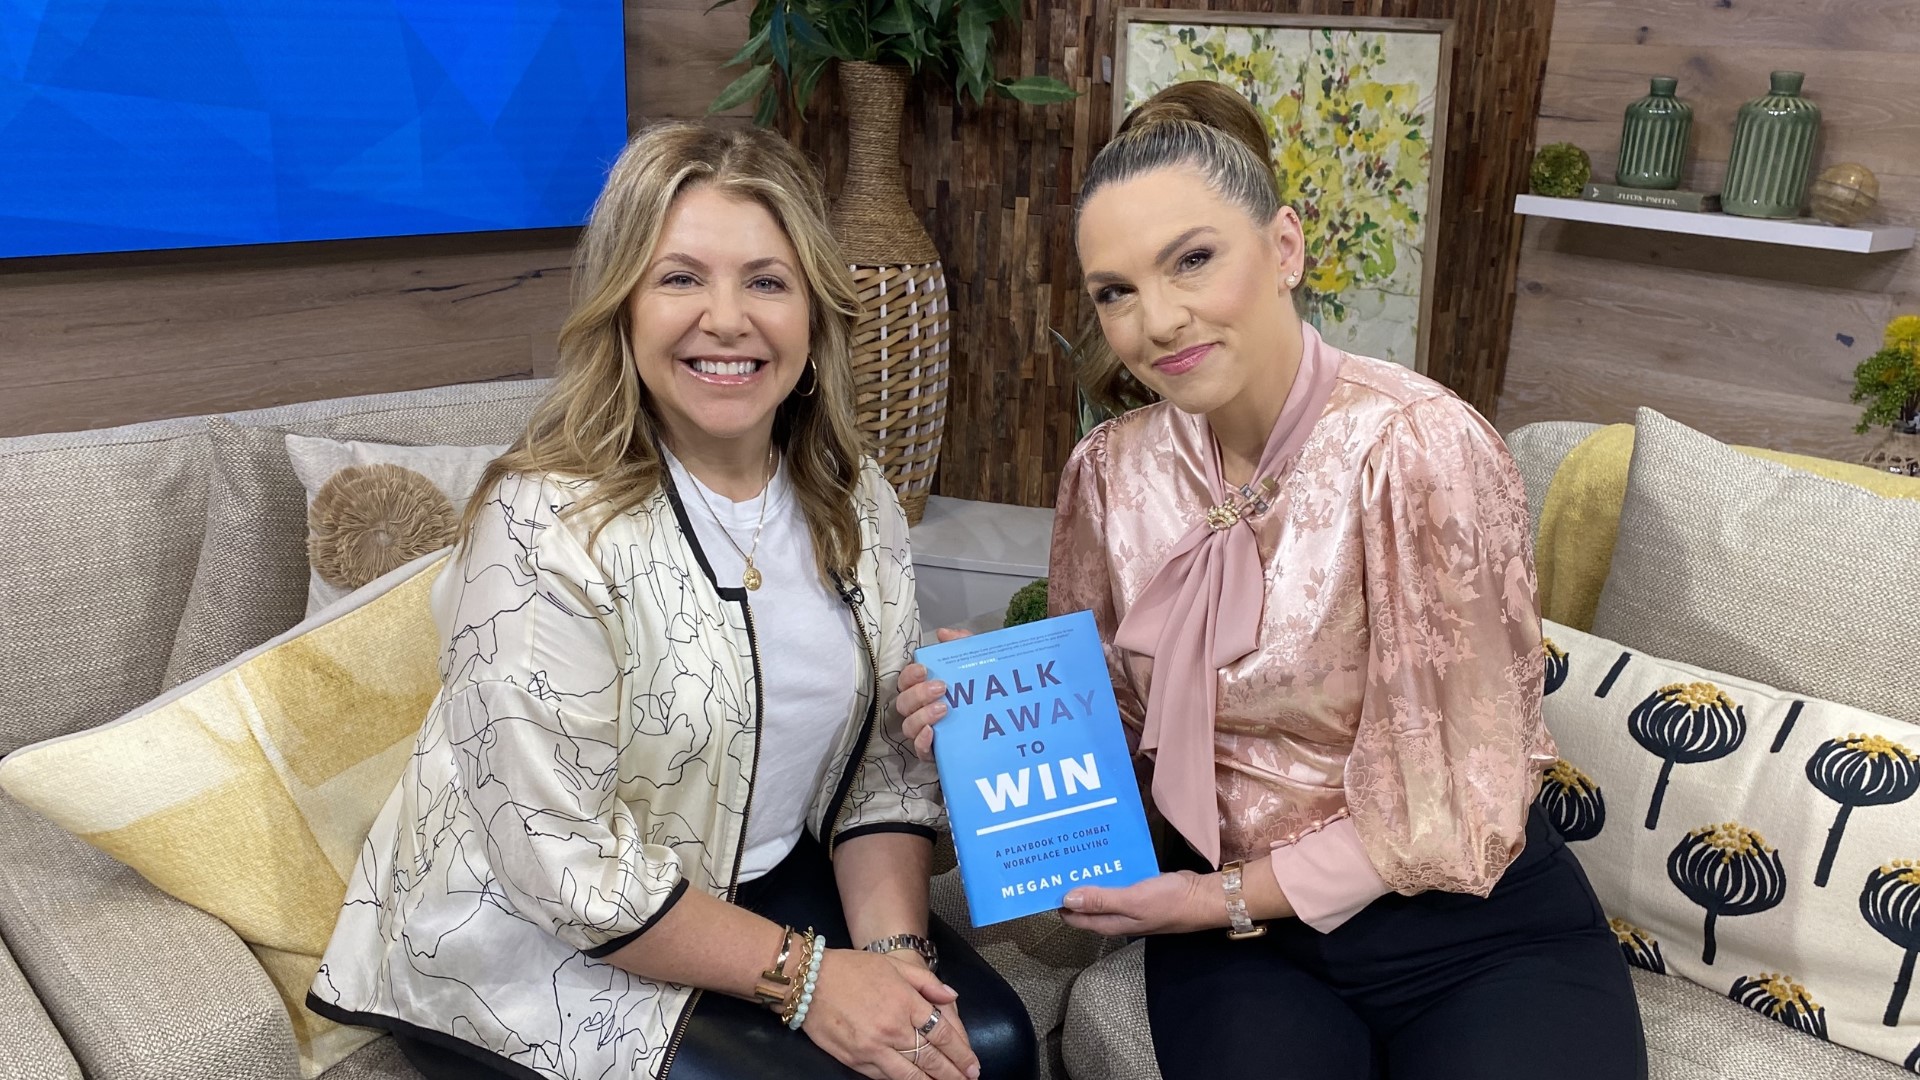 Megan Carle was a top executive at a major sports merchandise company when she left her job over workplace bullying. Her new book addresses the problem head-on.